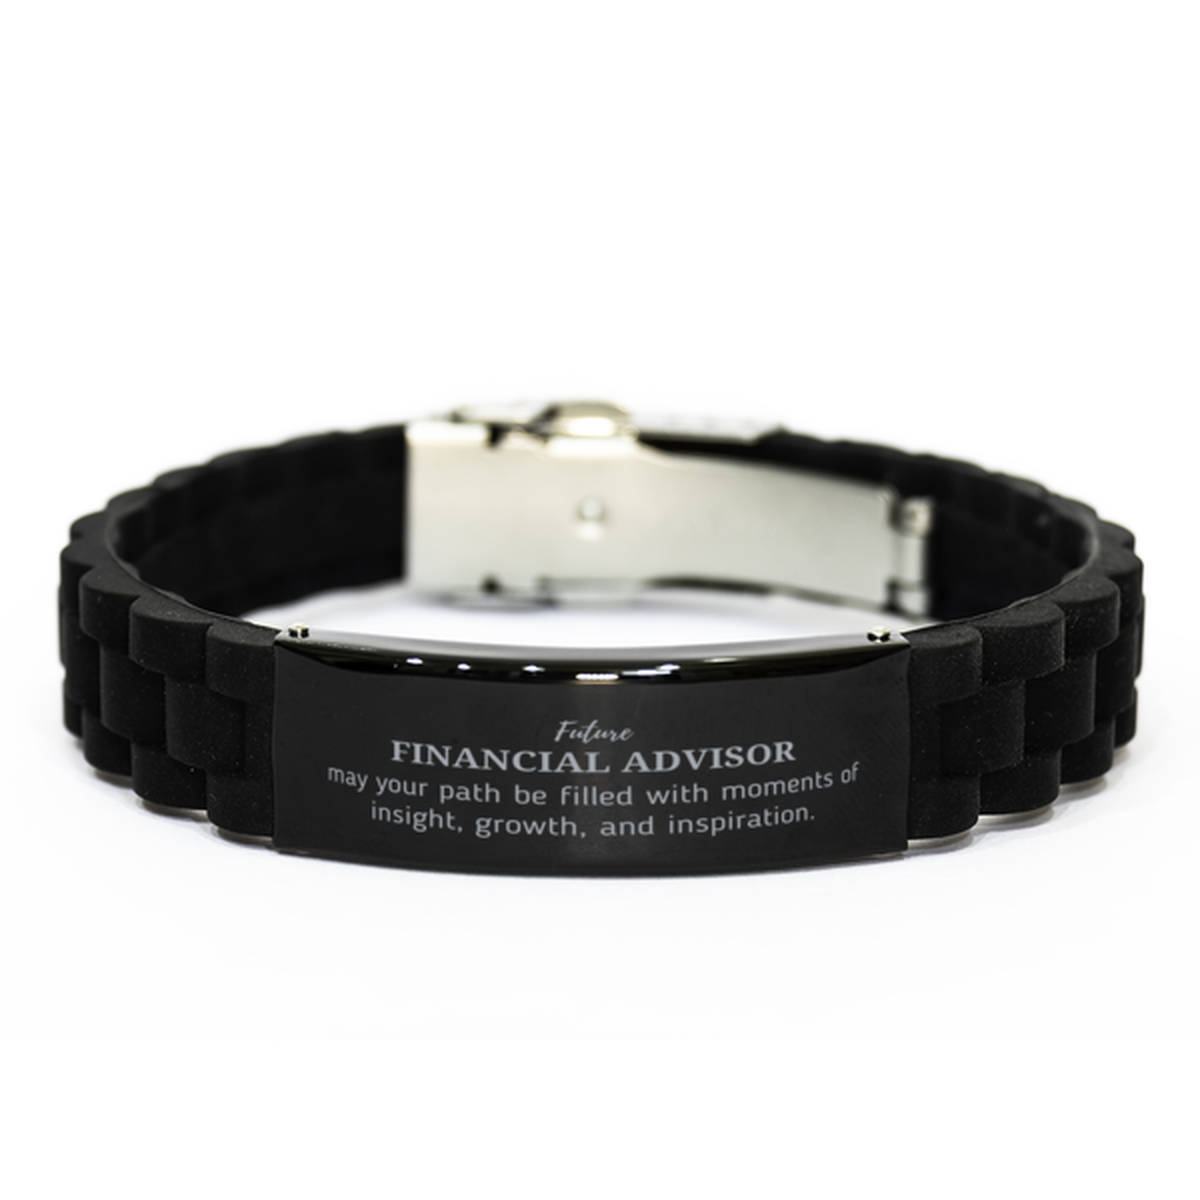 Future Financial Advisor Gifts, May your path be filled with moments of insight, Graduation Gifts for New Financial Advisor, Christmas Unique Black Glidelock Clasp Bracelet For Men, Women, Friends